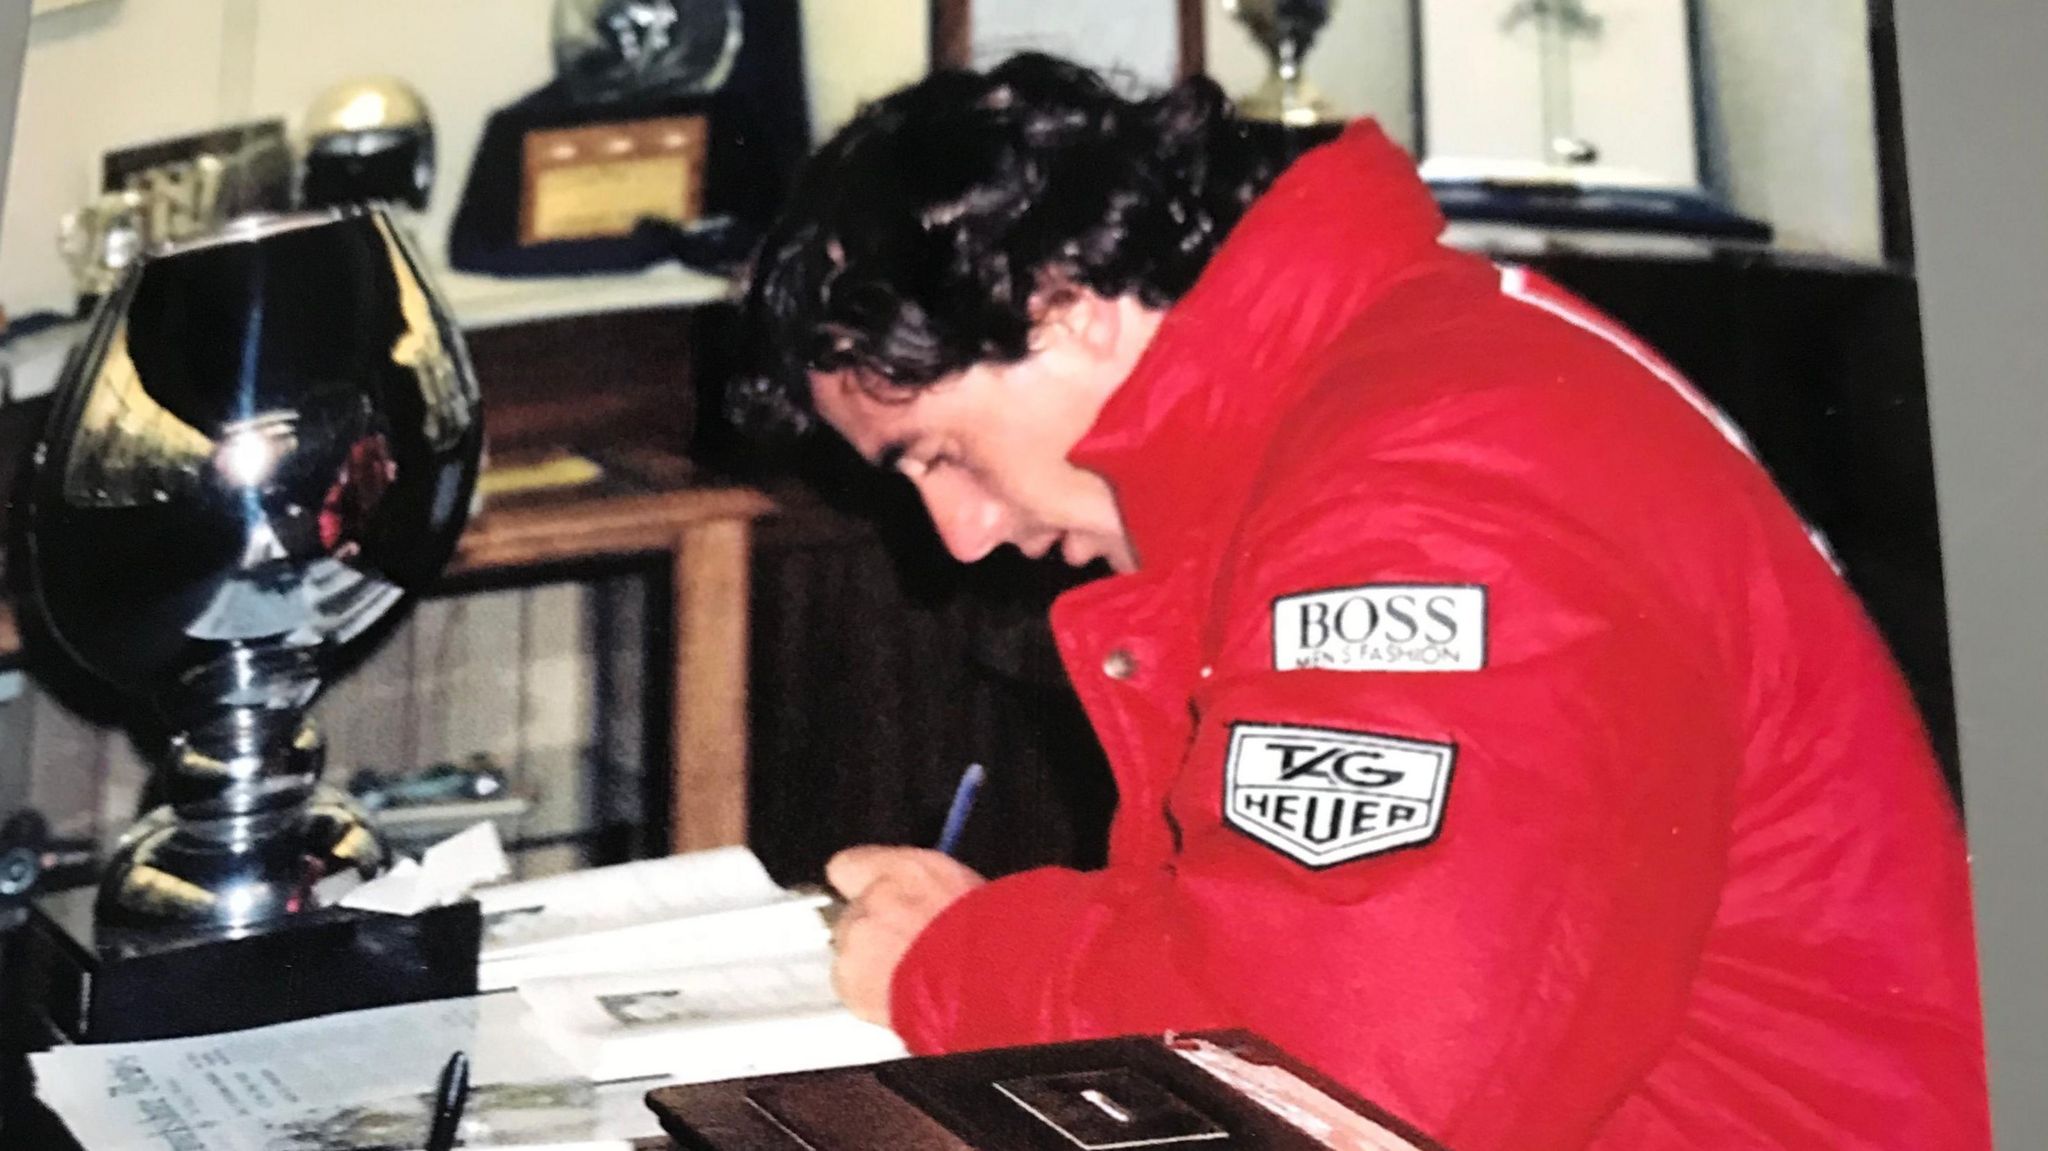 Ayrton Senna dressed in a red McLaren team coat signs the visitor book at the Jim Clark Museum